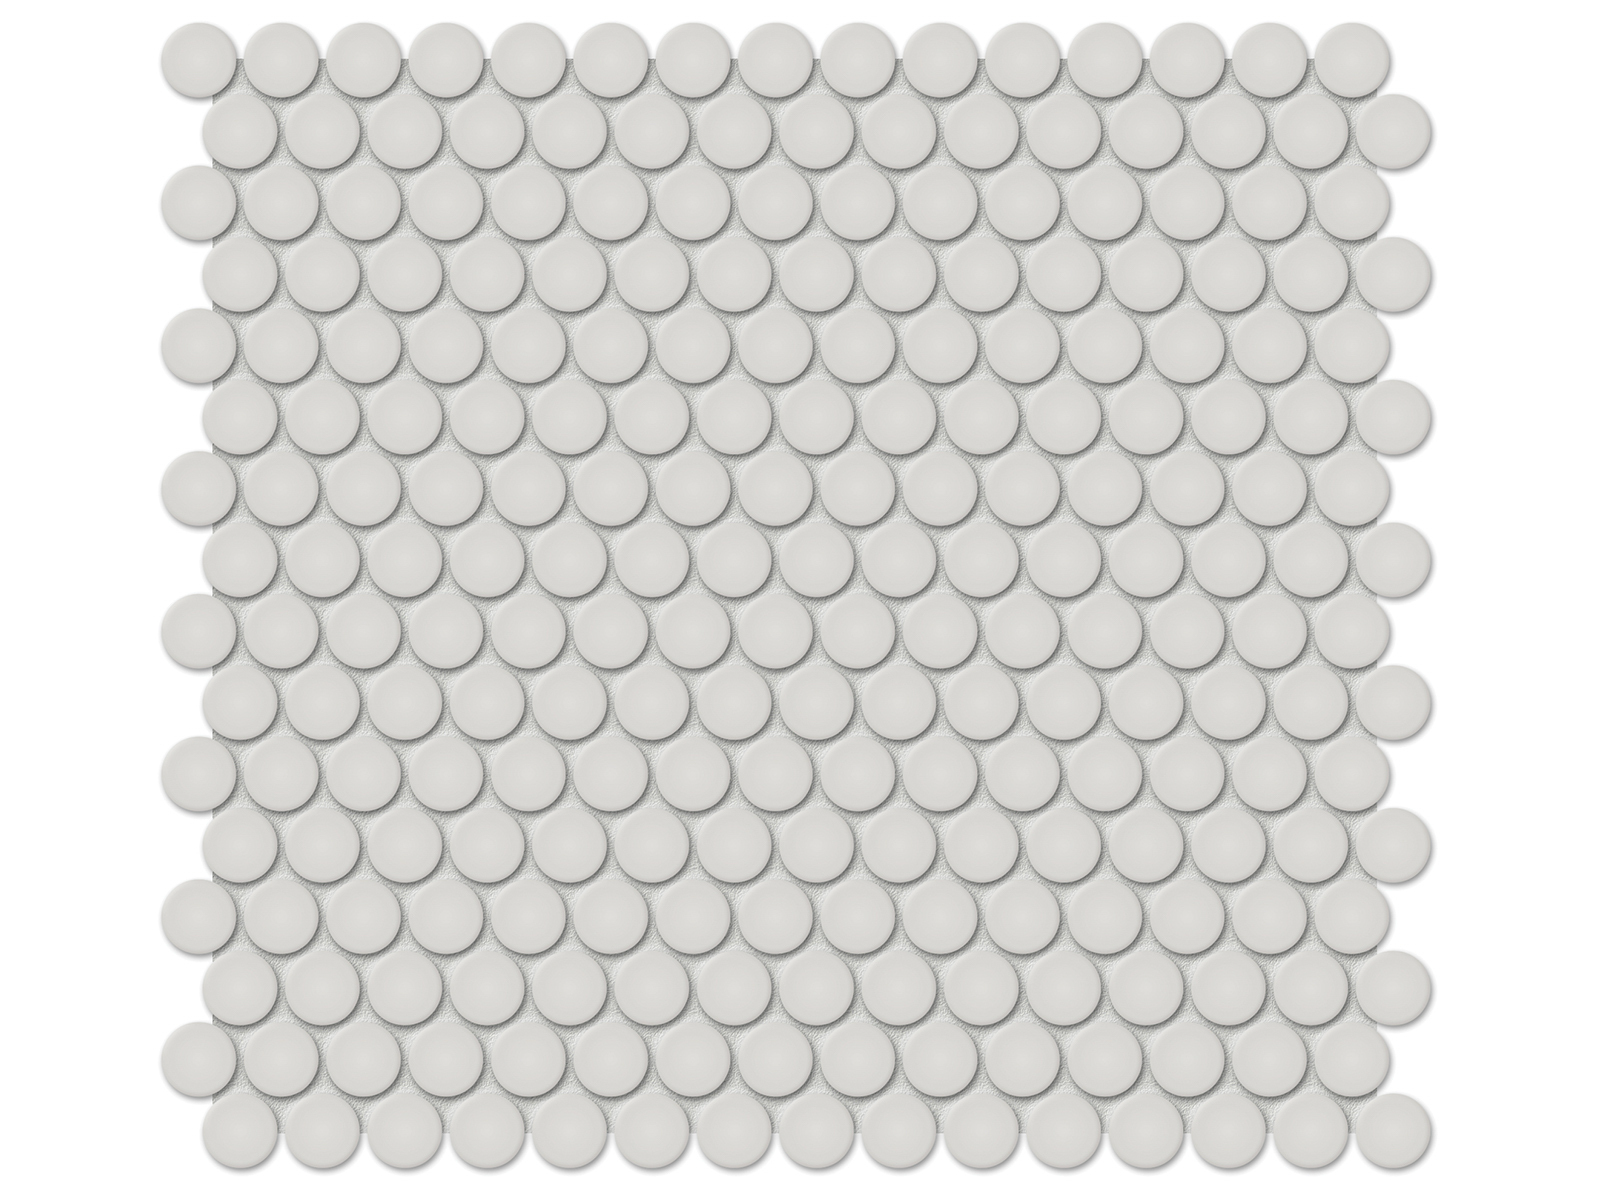 halo grey penny round 3_4-inch pattern glazed porcelain mosaic from soho anatolia collection distributed by surface group international matte finish pressed edge mesh shape